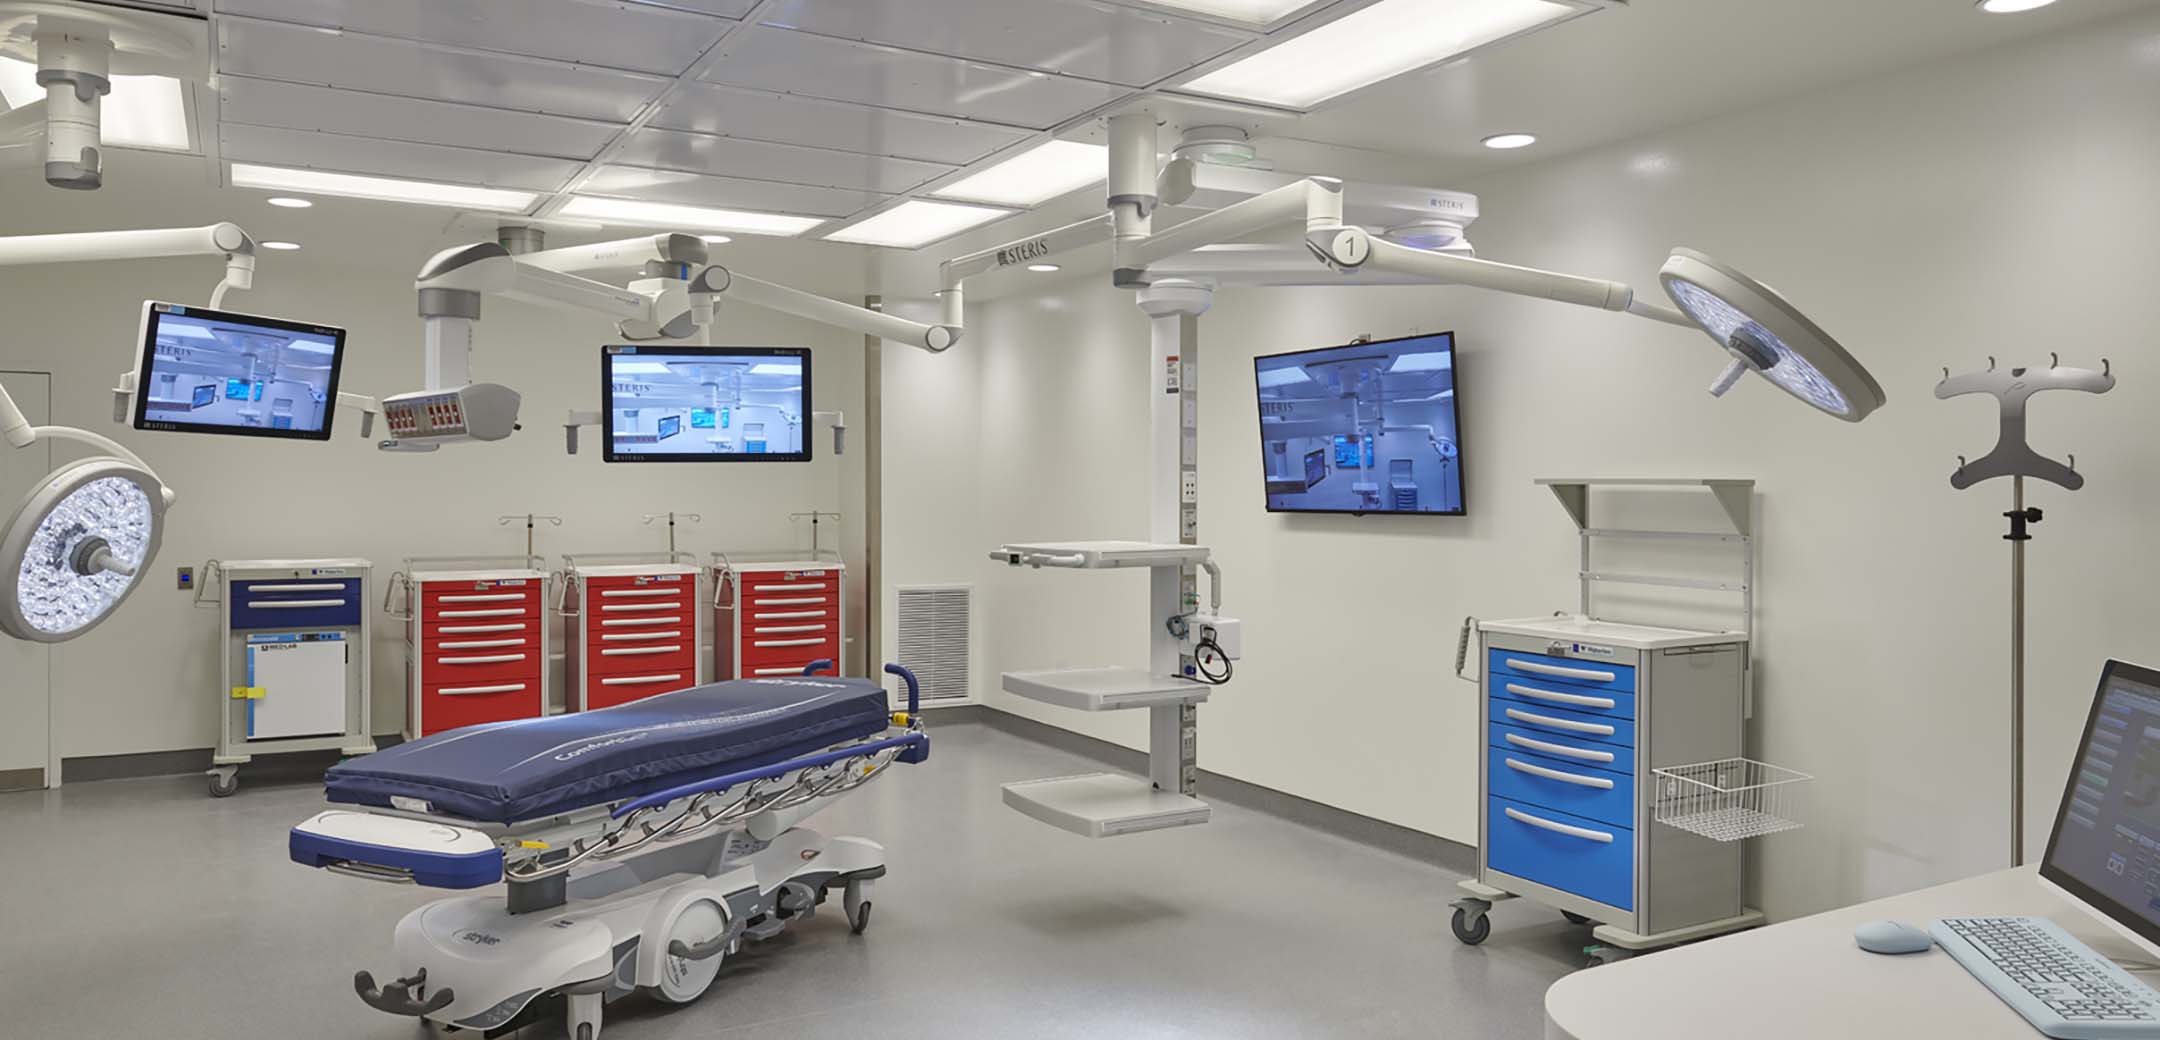 An interior image of the Penn Radnor Advanced Outpatient Care Center building showcasing the surgery room with equipment and bright ambient lighting.